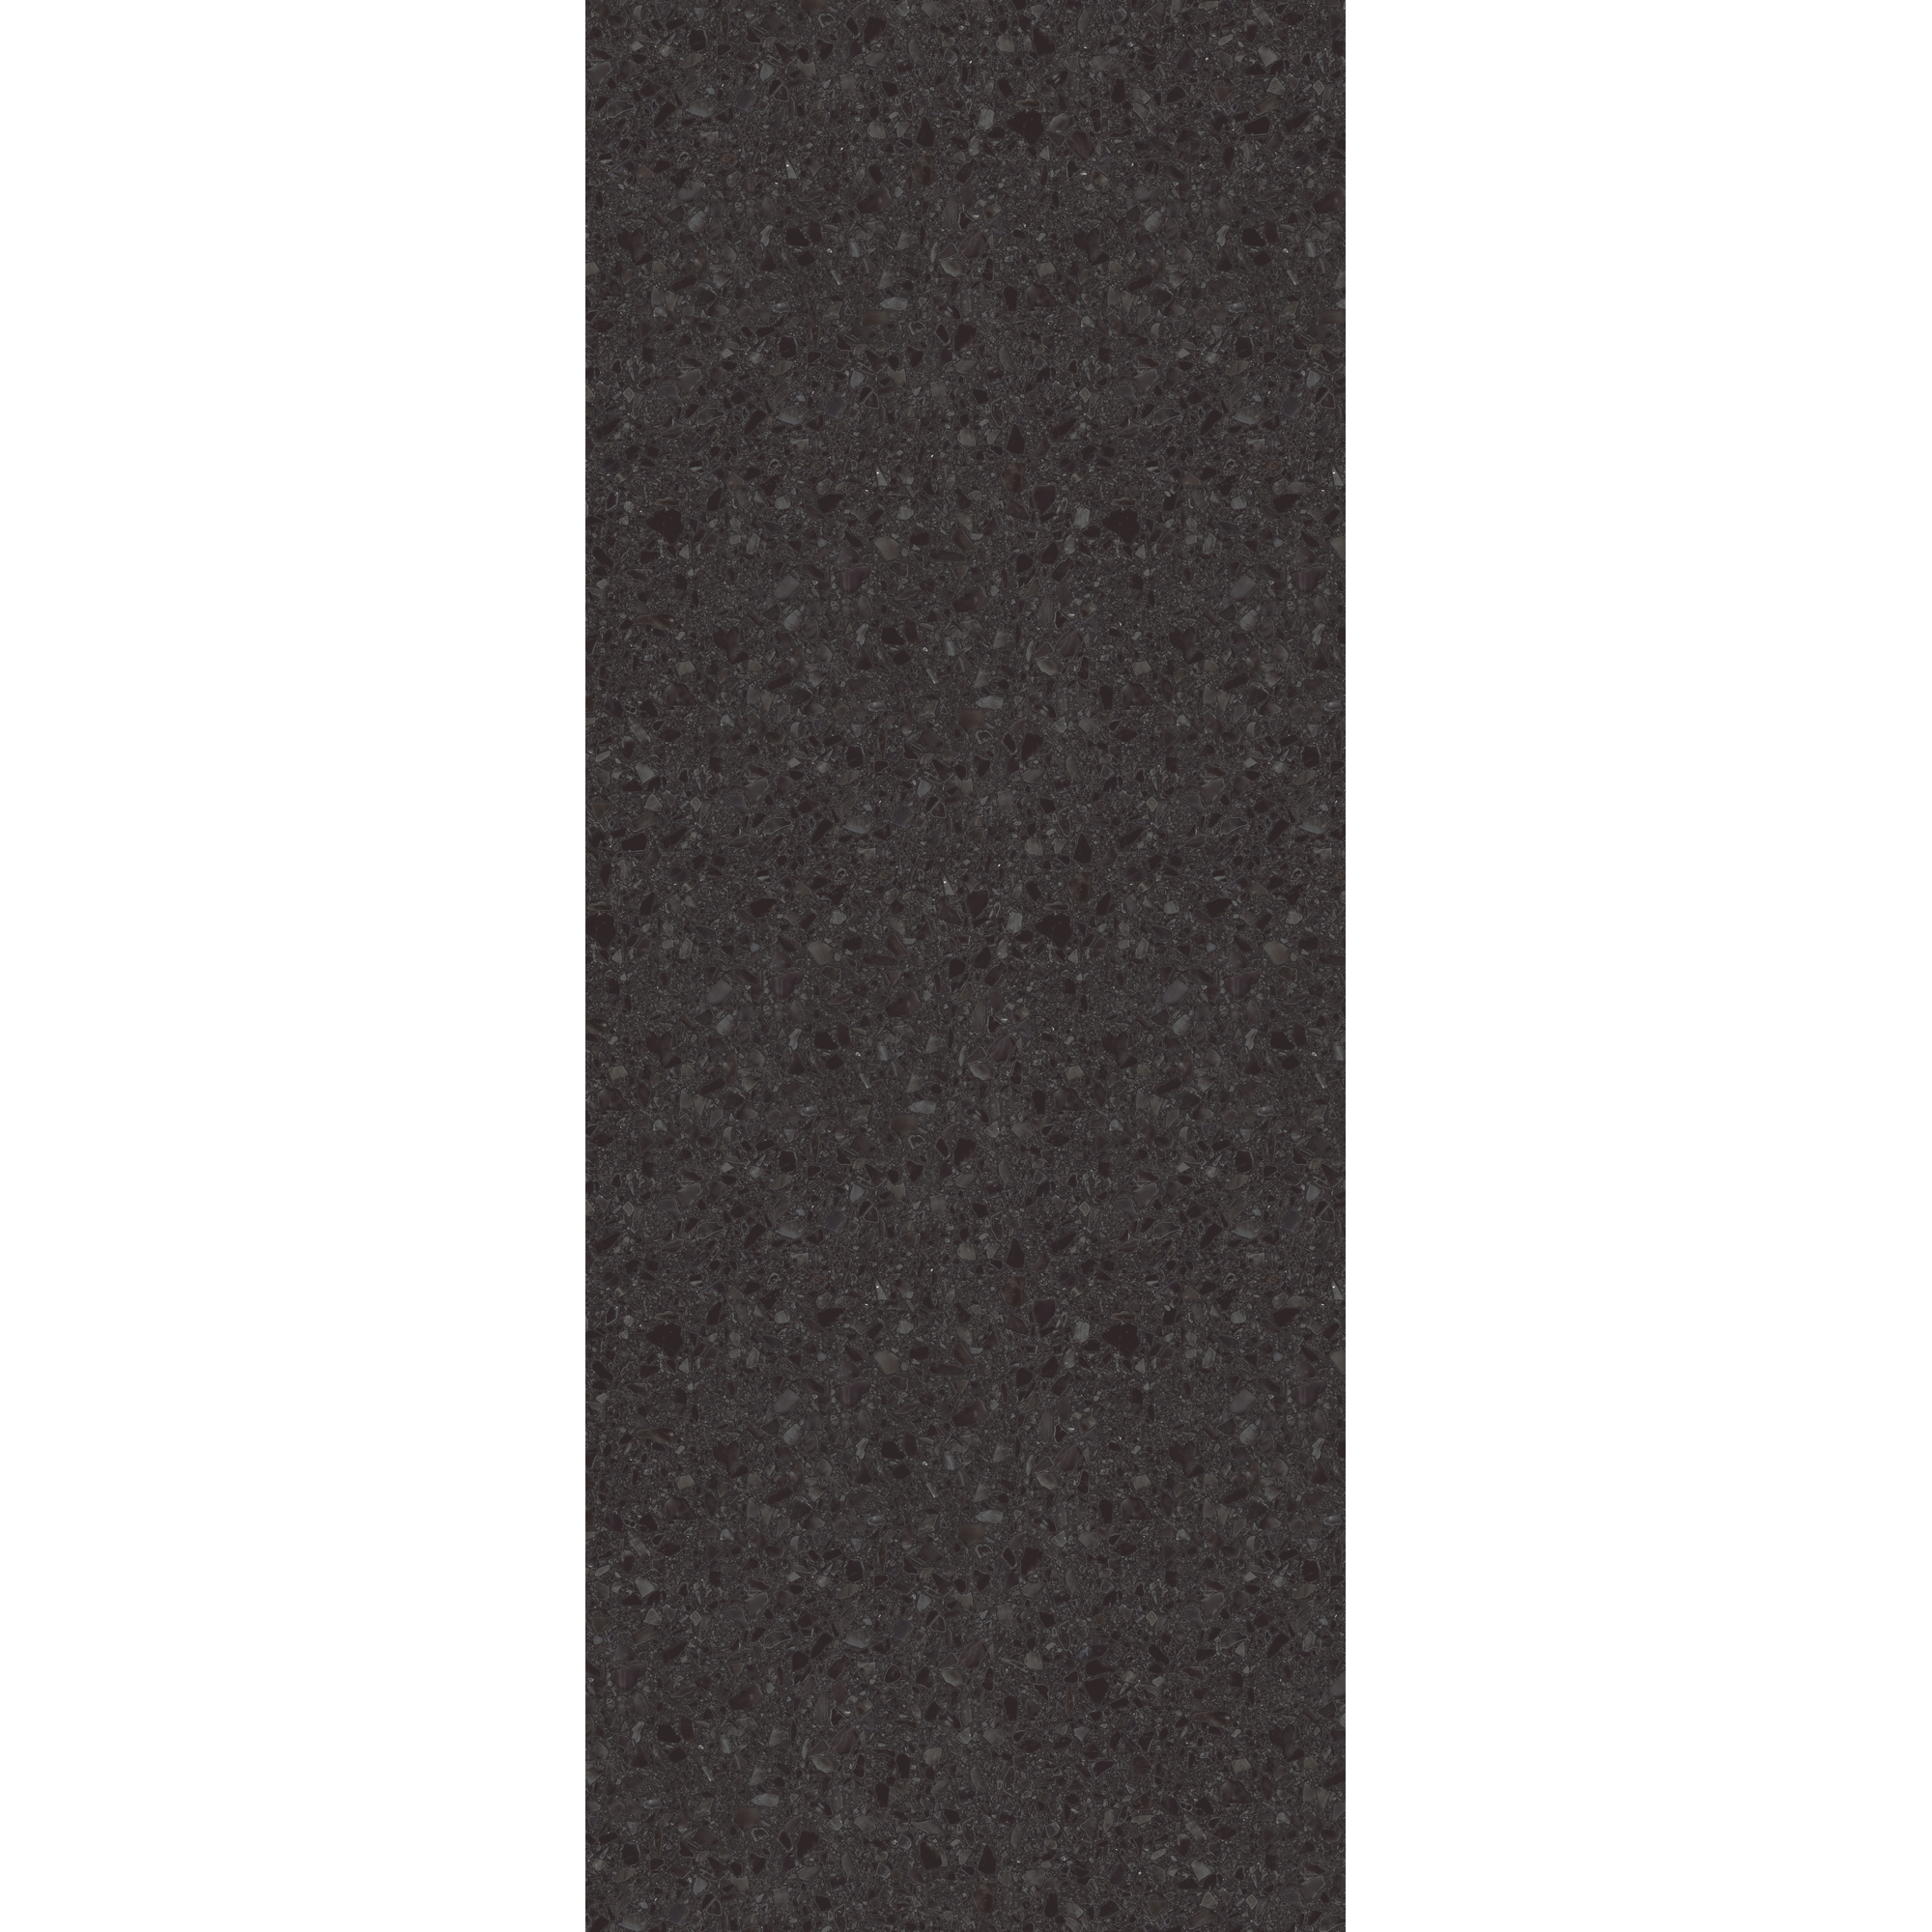 Duschrückwand 'DecoDesign' Softtouch Terrazzo-Anthrazit 100 x 255 cm + product picture